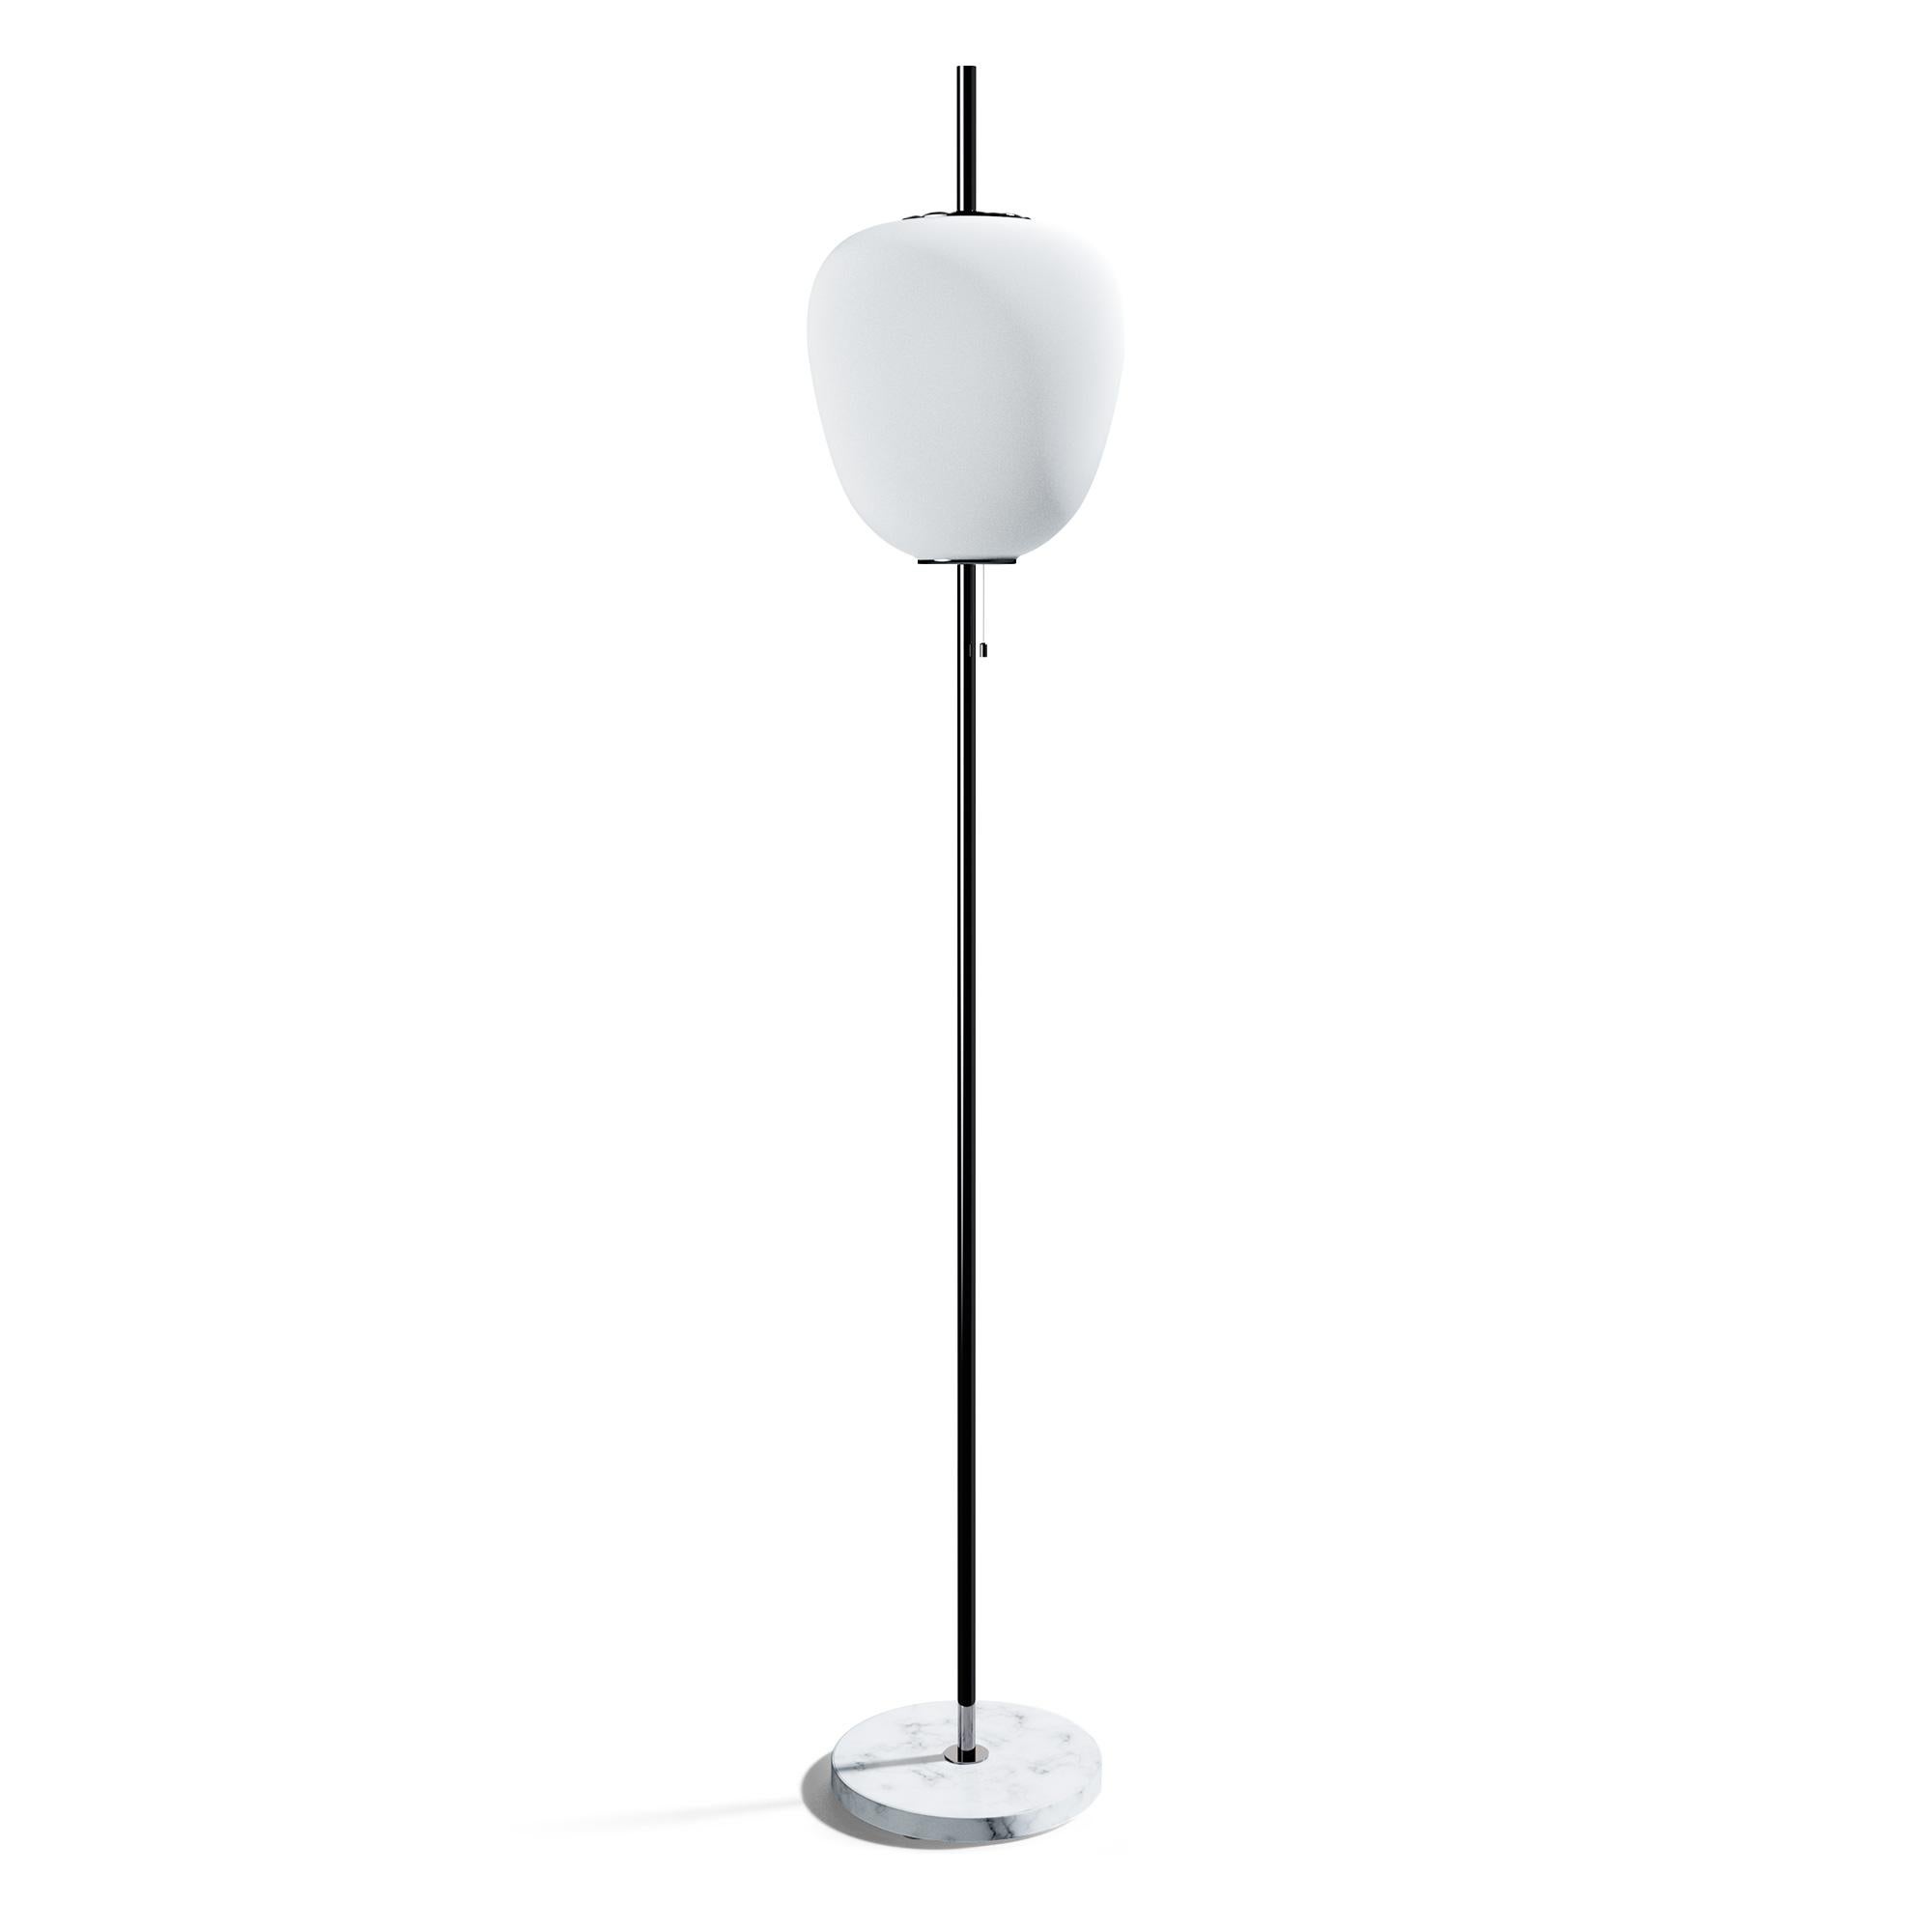 Large Joseph-André Motte J14 floor lamp in gunmetal and gray marble for Disderot. 

Originally designed in 1957, this sculptural floor lamp is a newly produced numbered edition with authentication certificate made in France by Disderot with many of